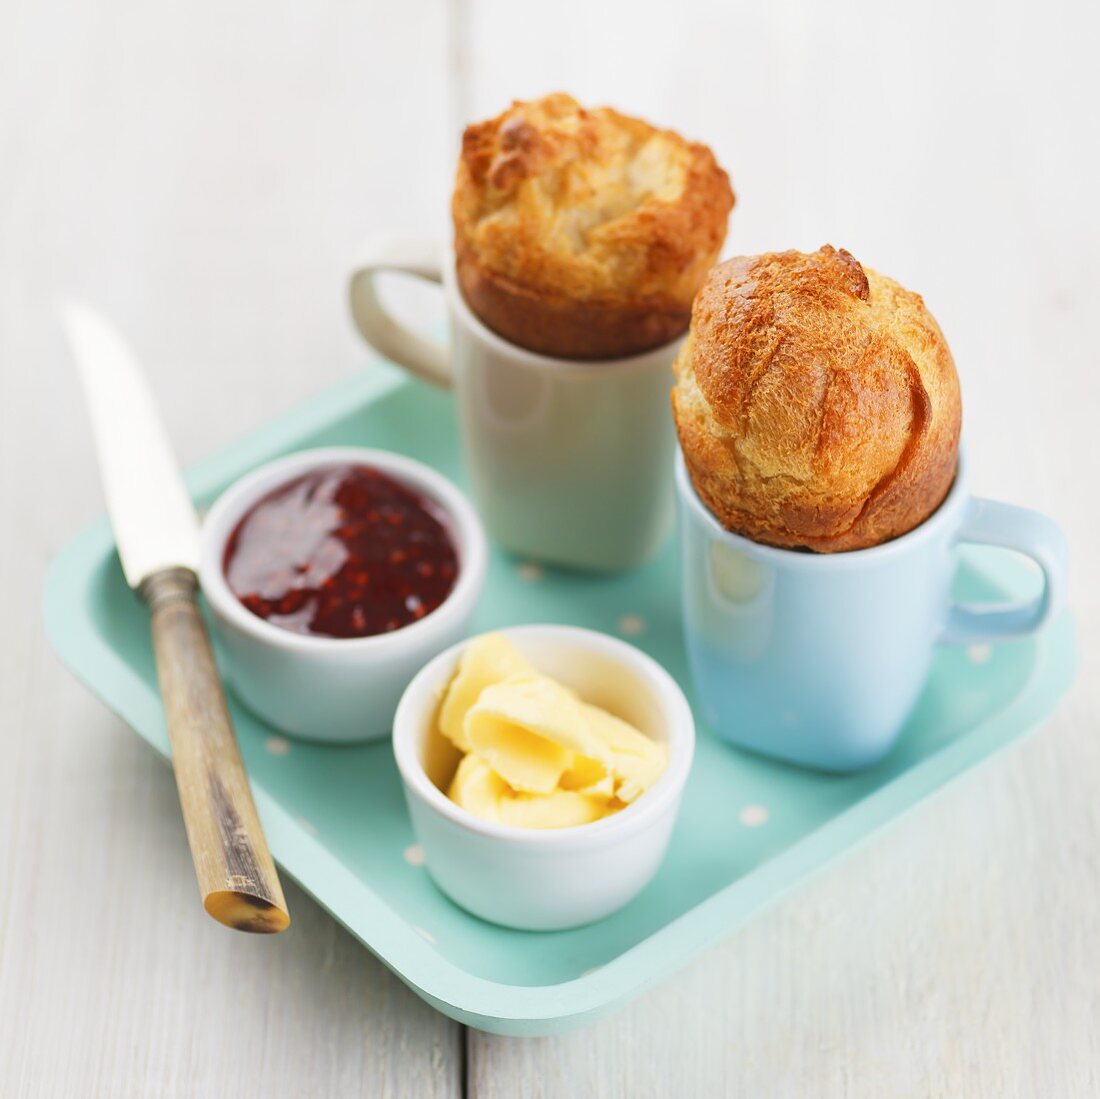 Popovers (American breakfast pastries) with butter and jam